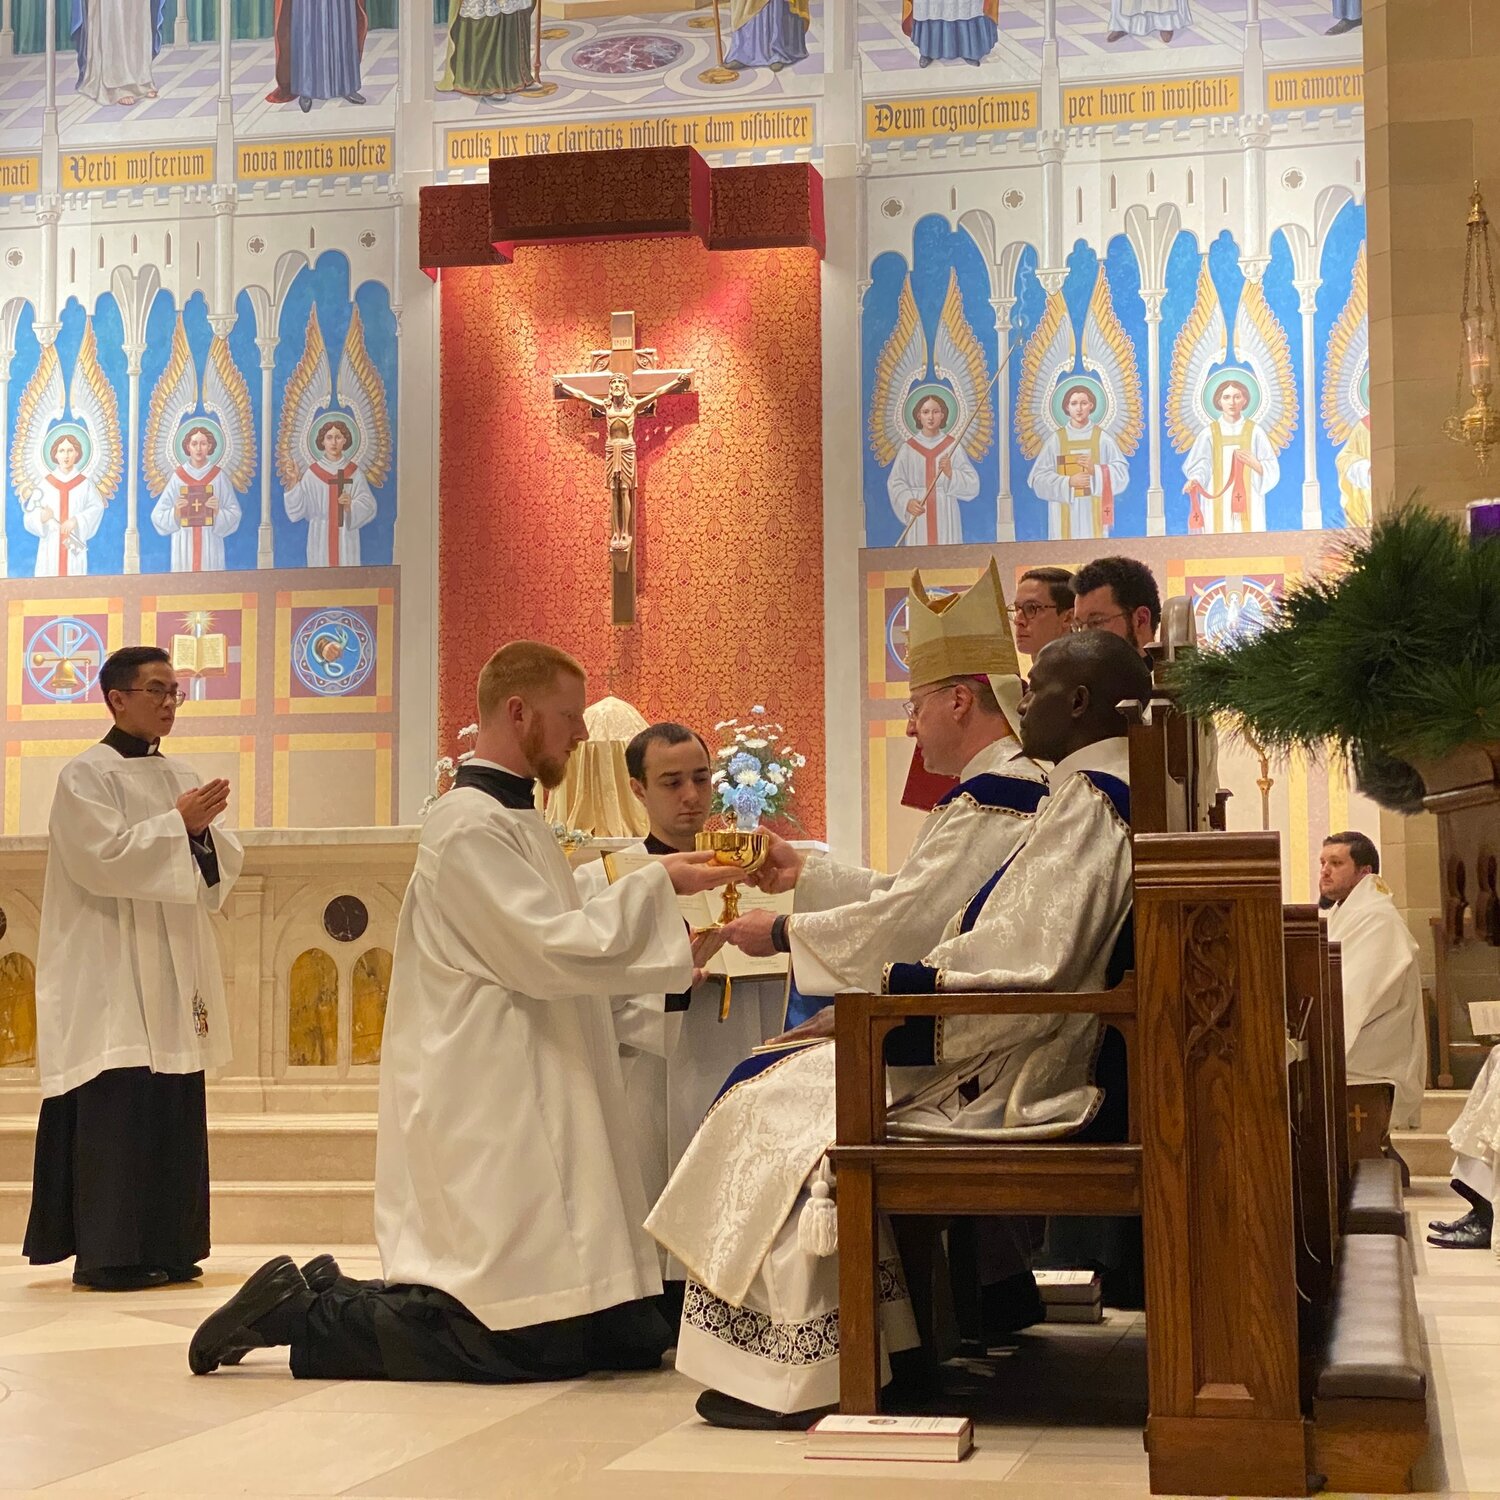 Bishop W. Shawn McKnight ceremonially presents a chalice to seminarian Christopher Hoffmann, a seminarian for the Jefferson City diocese who has since been ordained a transitional deacon, while instituting him as an acolyte in the chapel of the Pontifical College Josephinum on Dec. 8, 2021.